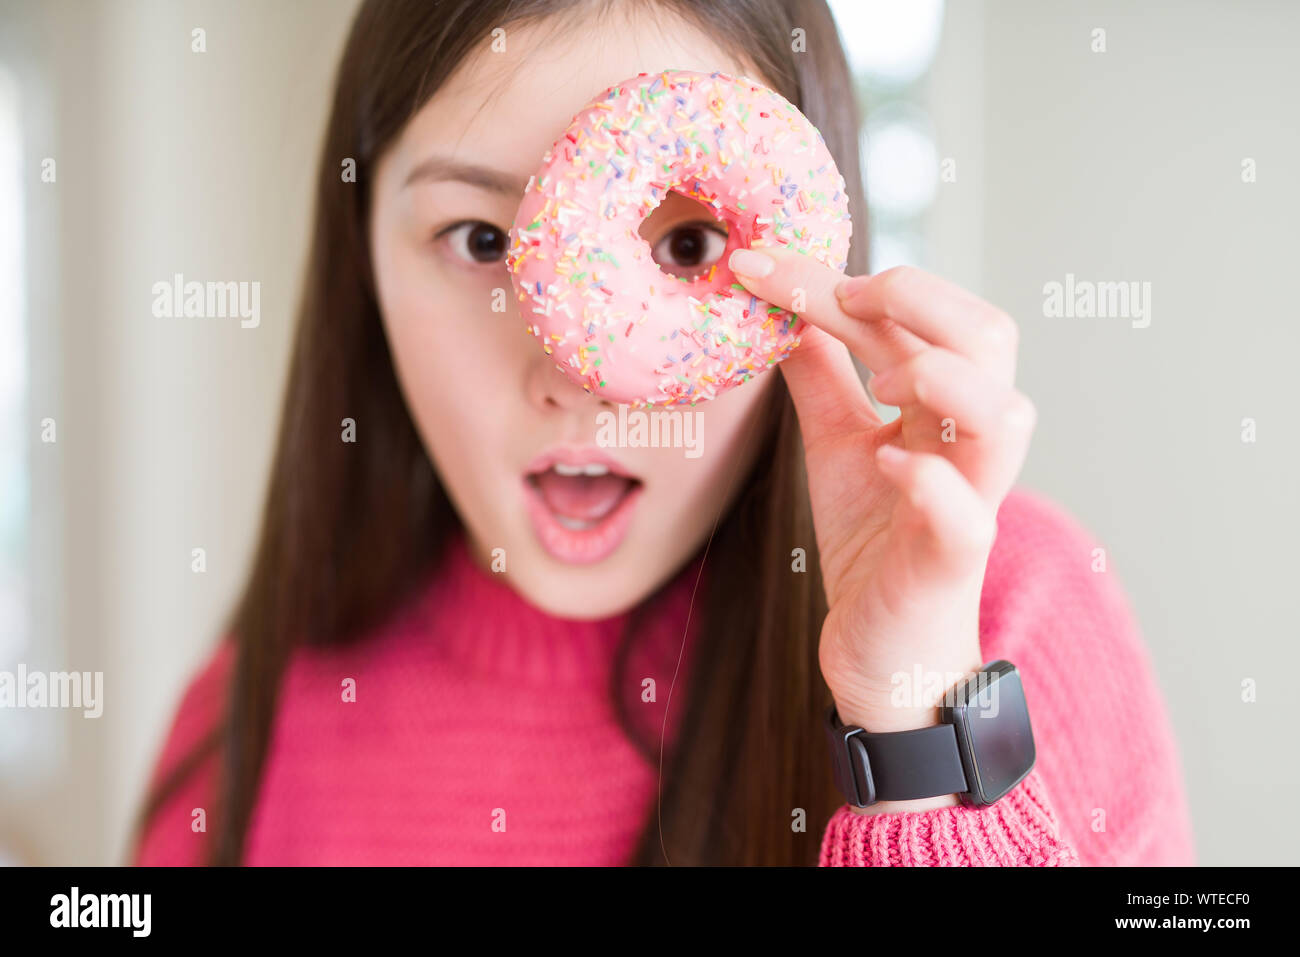 Beautiful Asian Woman Eating Pink Sugar Donut Scared In Shock With A Surprise Face Afraid And 